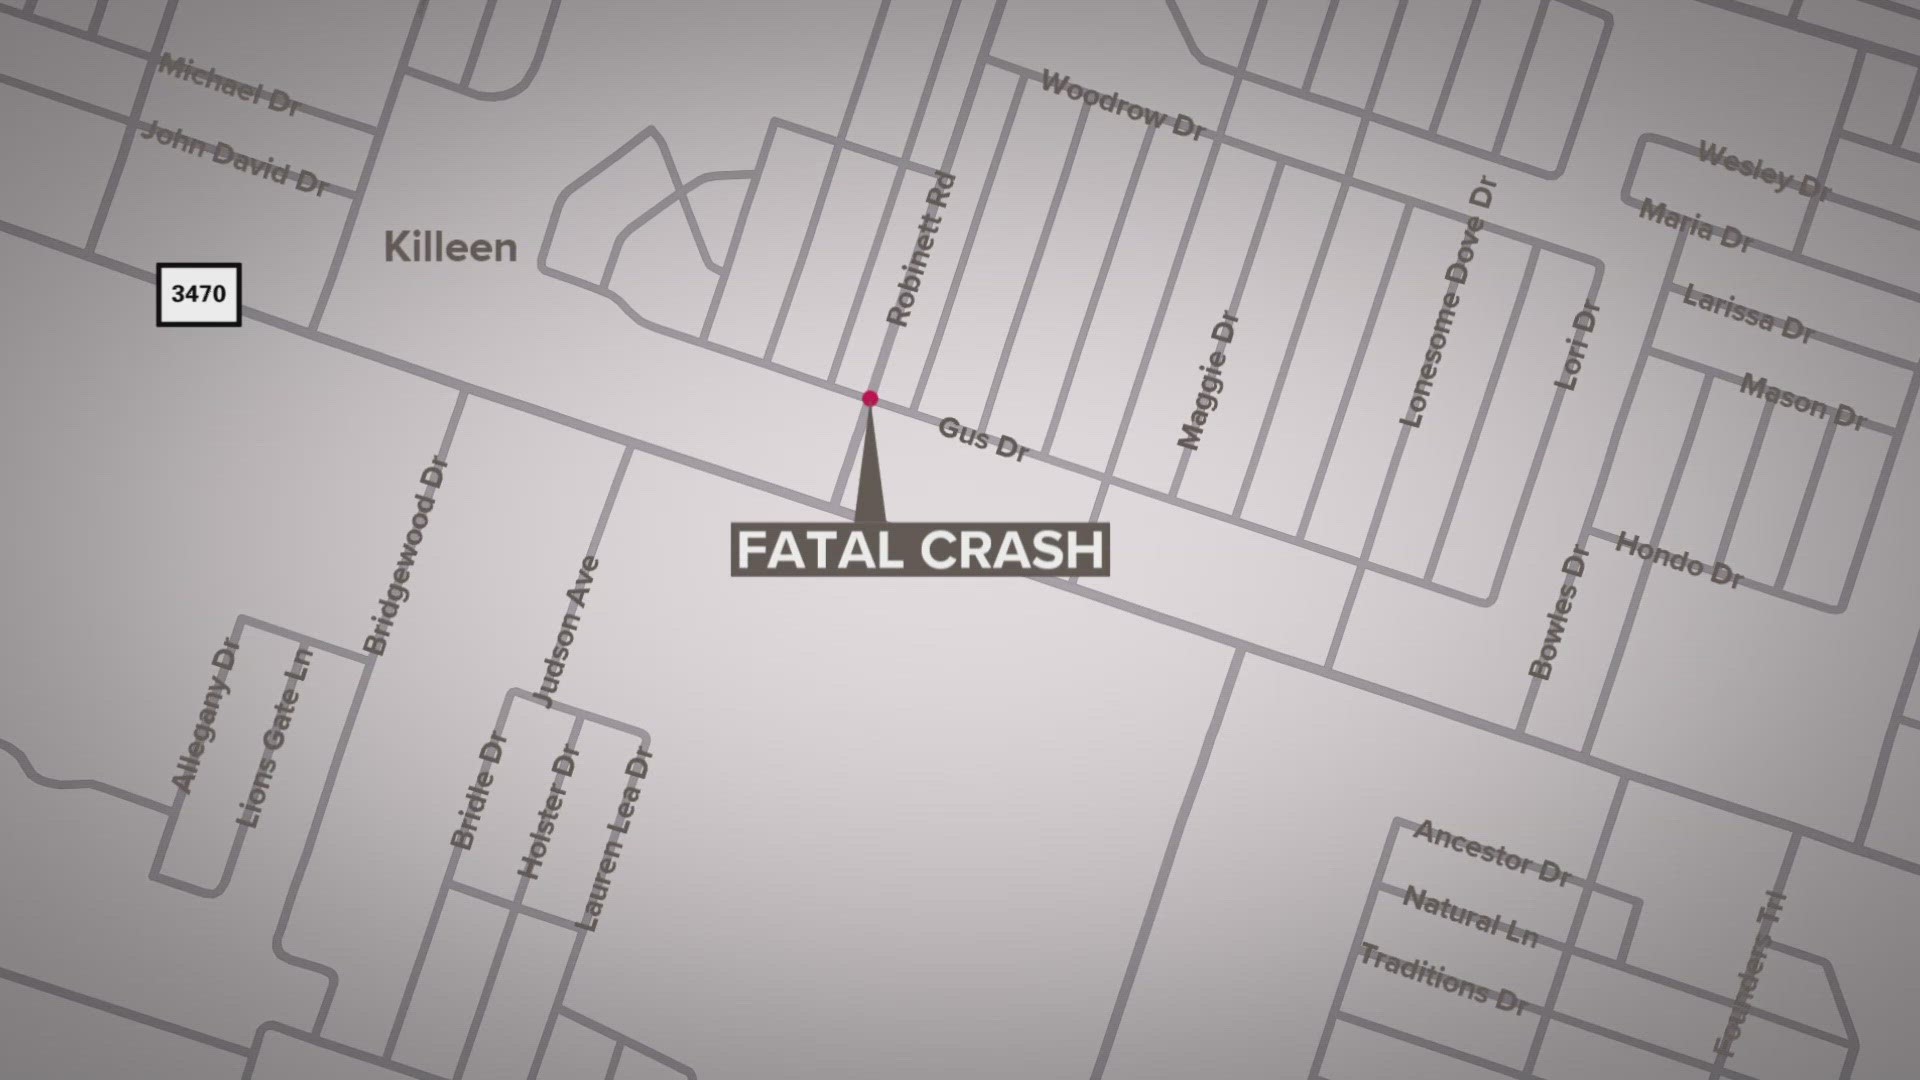 Killeen Police say a 45-year-old man was killed in a multiple vehicle accident on April 7.